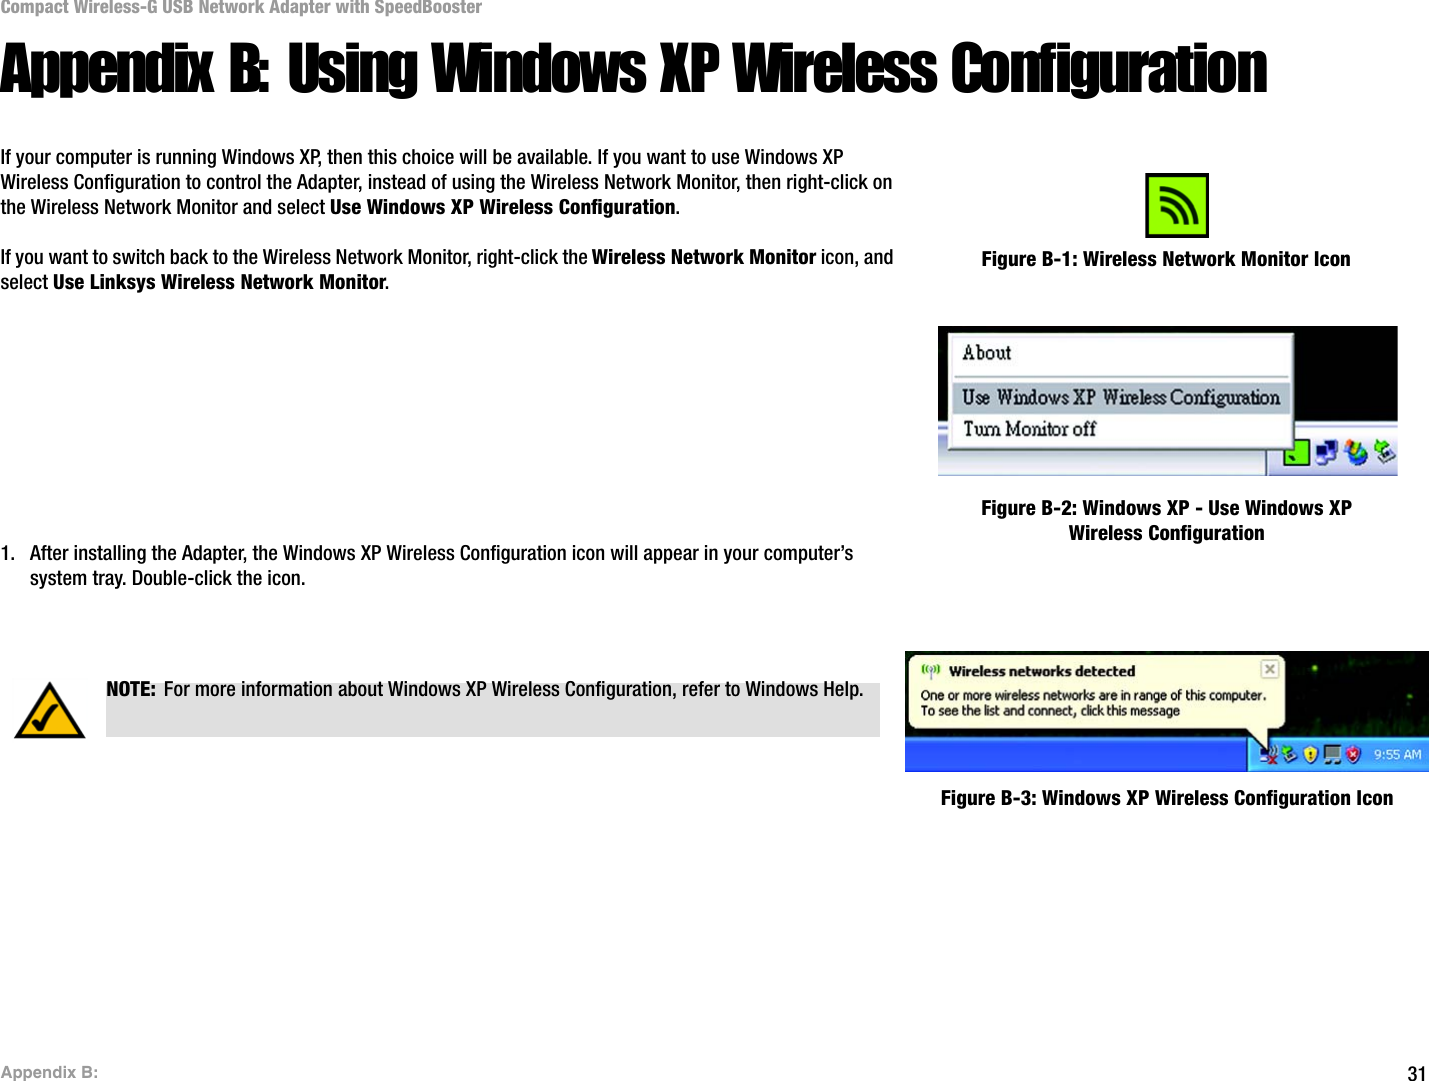 31Appendix B: Compact Wireless-G USB Network Adapter with SpeedBoosterAppendix B: Using Windows XP Wireless ConfigurationIf your computer is running Windows XP, then this choice will be available. If you want to use Windows XP Wireless Configuration to control the Adapter, instead of using the Wireless Network Monitor, then right-click on the Wireless Network Monitor and select Use Windows XP Wireless Configuration. If you want to switch back to the Wireless Network Monitor, right-click the Wireless Network Monitor icon, and select Use Linksys Wireless Network Monitor.1. After installing the Adapter, the Windows XP Wireless Configuration icon will appear in your computer’s system tray. Double-click the icon. Figure B-1: Wireless Network Monitor IconFigure B-2: Windows XP - Use Windows XP Wireless ConfigurationNOTE: For more information about Windows XP Wireless Configuration, refer to Windows Help.Figure B-3: Windows XP Wireless Configuration Icon